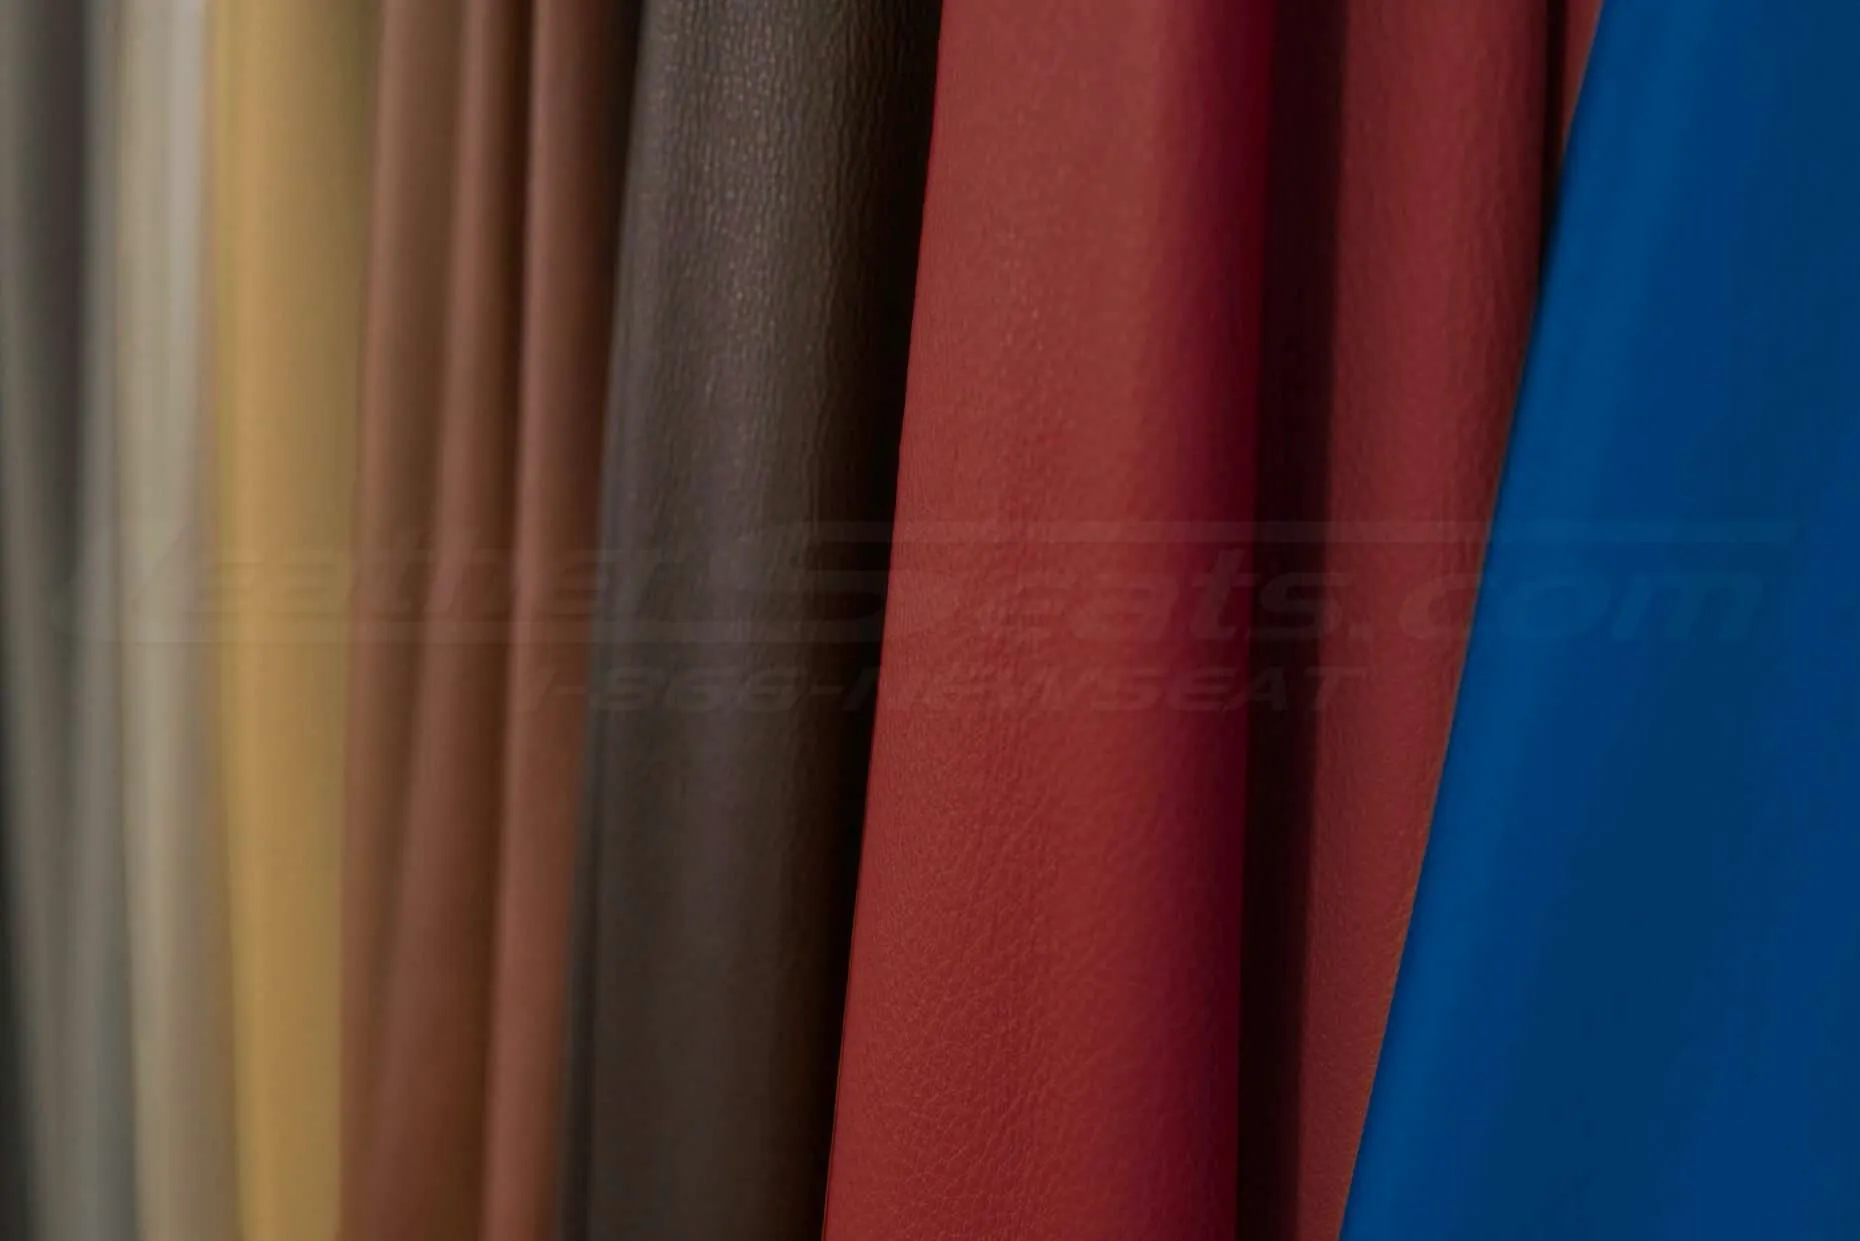 Colored Ecstas Leather Hides